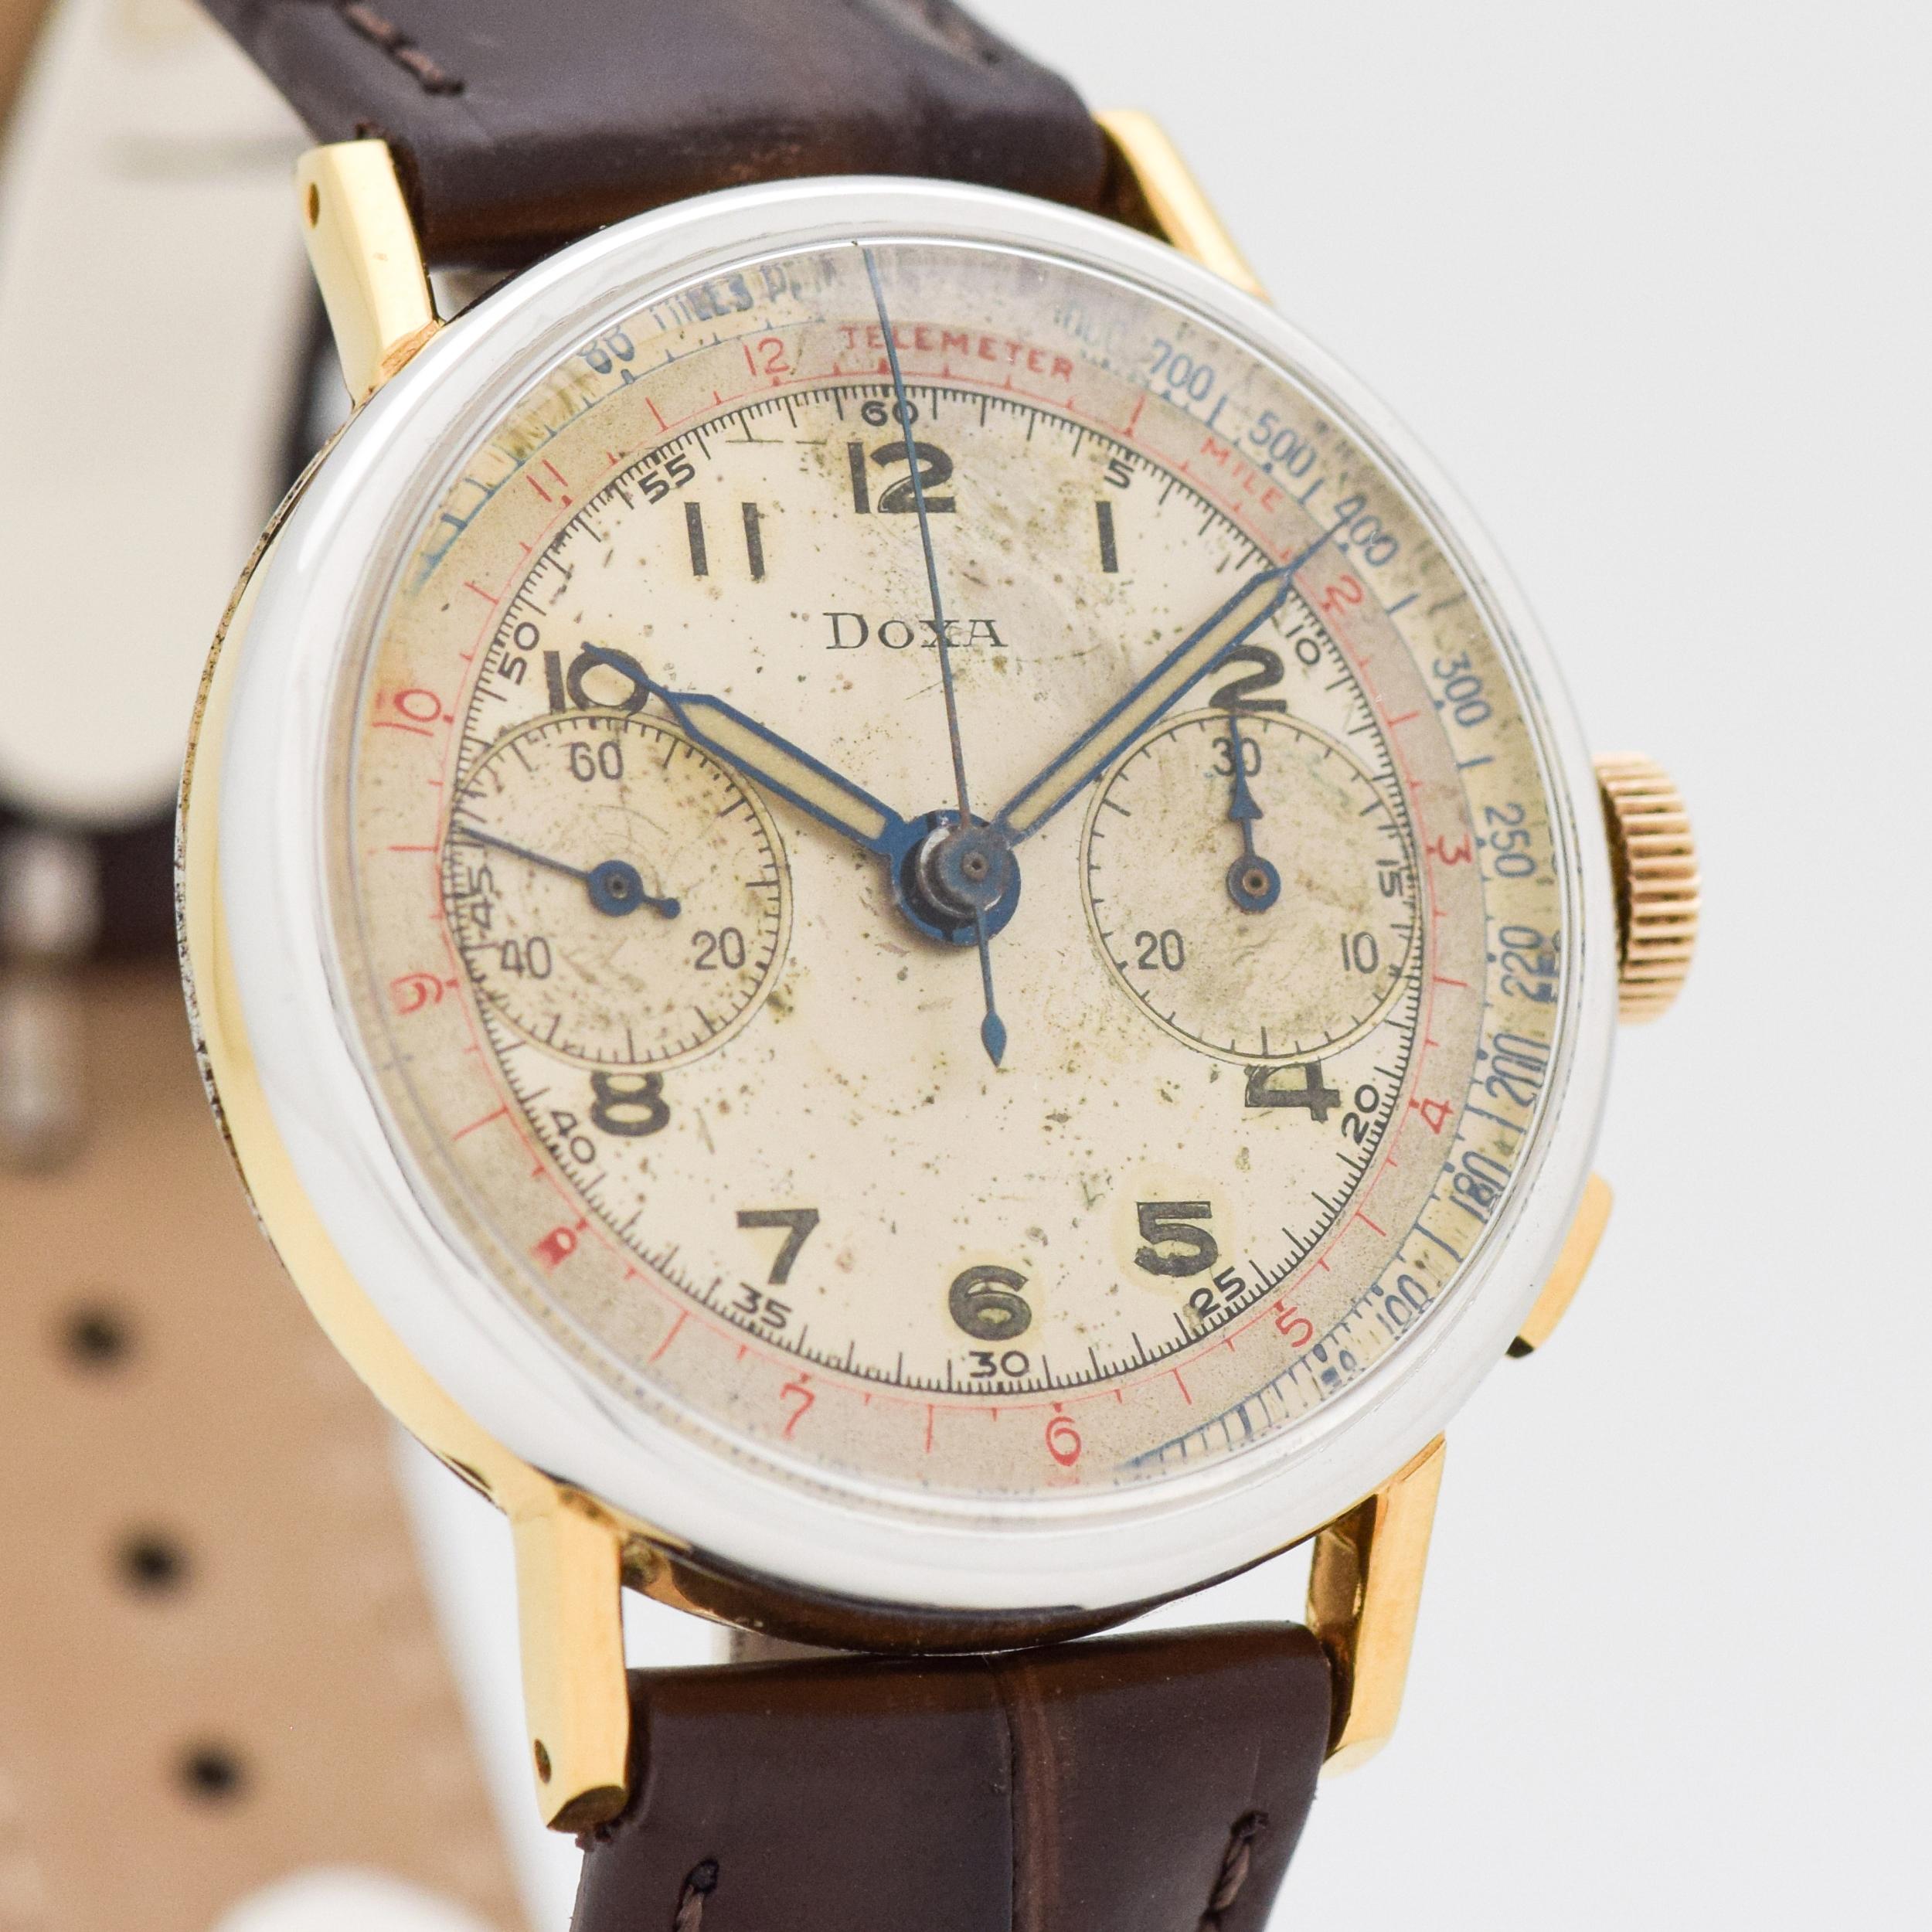 1950's Vintage Doxa 2 Register Chronograph Two Tone 14k White Gold Filled Bezel with 14k Yellow Gold Filled Case and Stainless Steel Case Back with Original Silver Dial with Luminous Arabic Numbers with Red and Blue Outer Tachometer Tracks. 34mm x